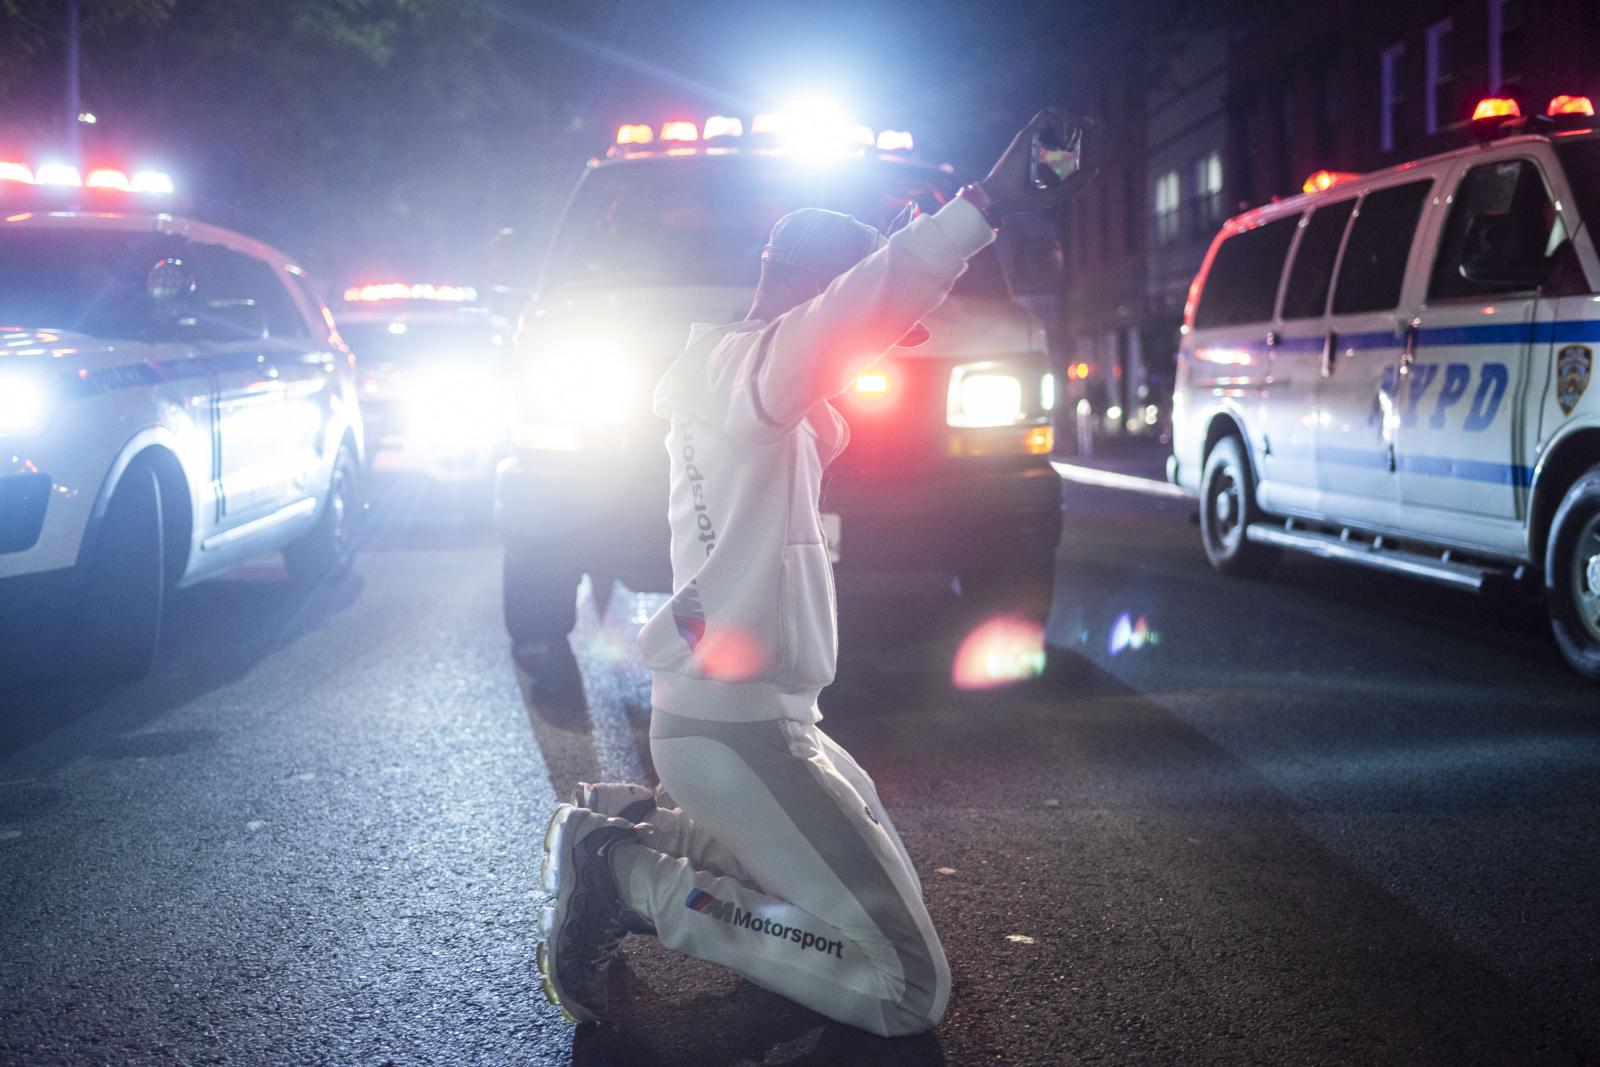 Image from NYC: MidiaNinja - A man is being detained during a protest for the death of...